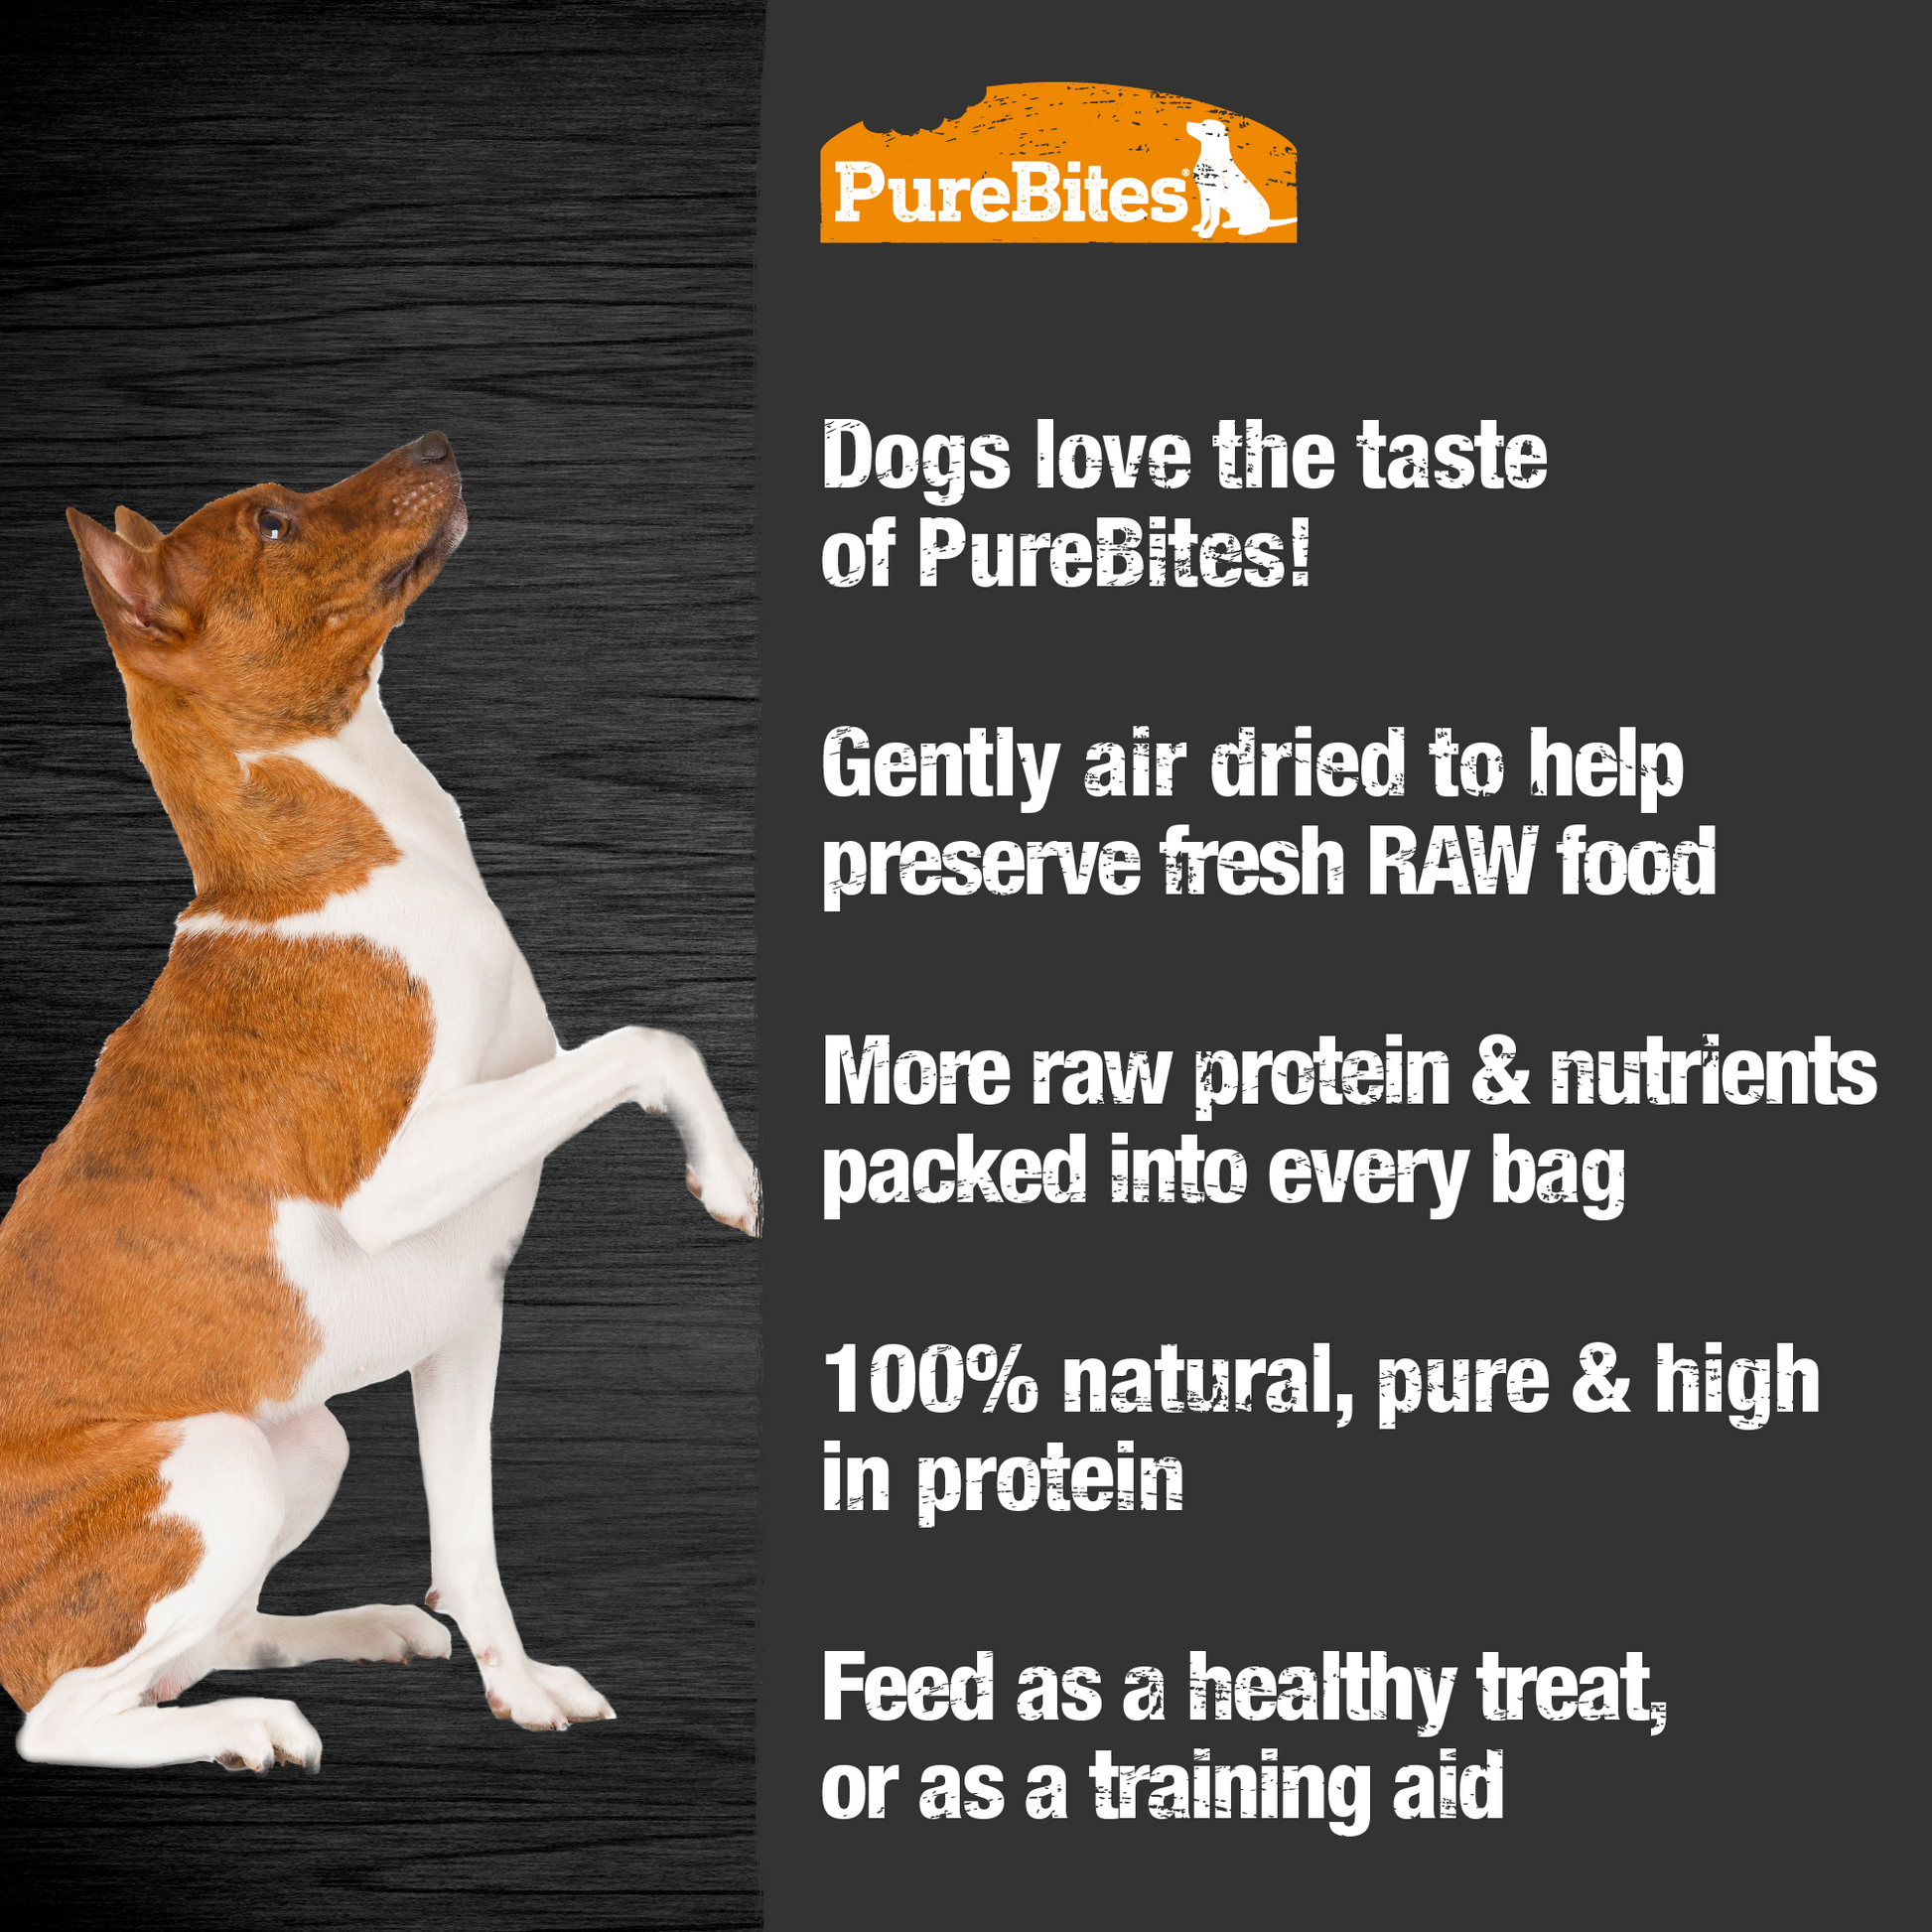 Made fresh & pure means more RAW protein and nutrients packed into every bag. Our duck jerky is delicately air dried to help preserve its RAW taste, and nutrition, and mirror a dog’s ancestral diet.